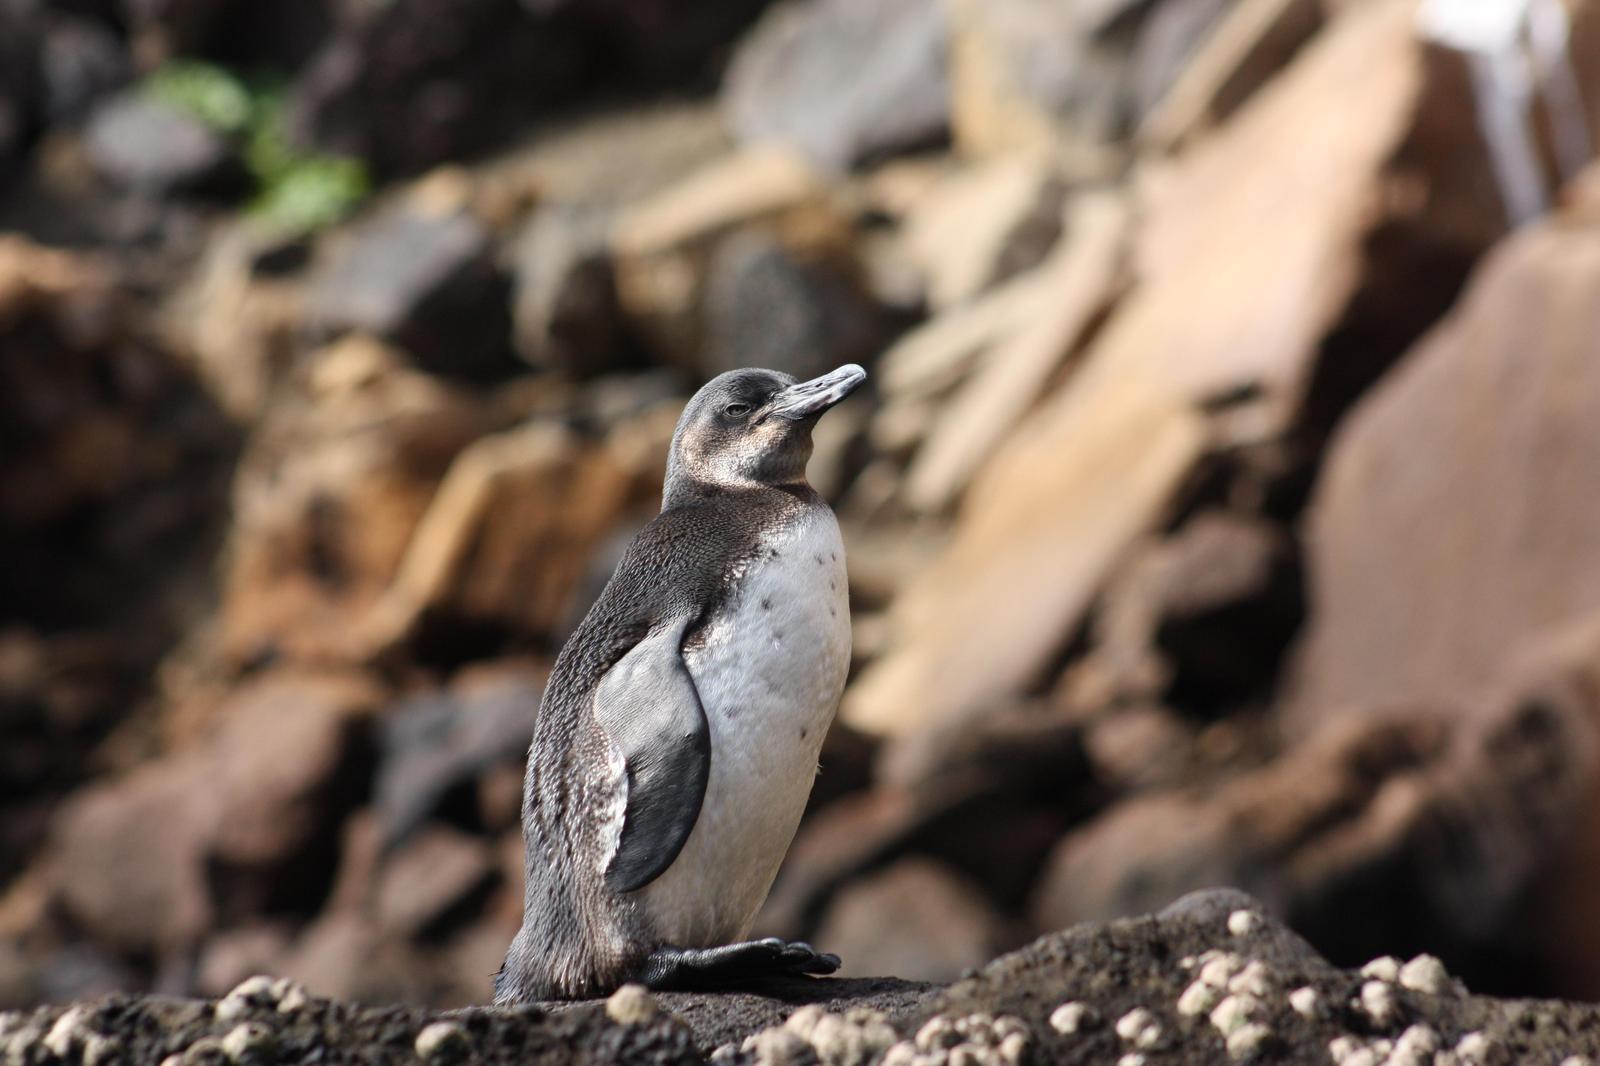 Galapagos Penguin Photo by Linda Fields